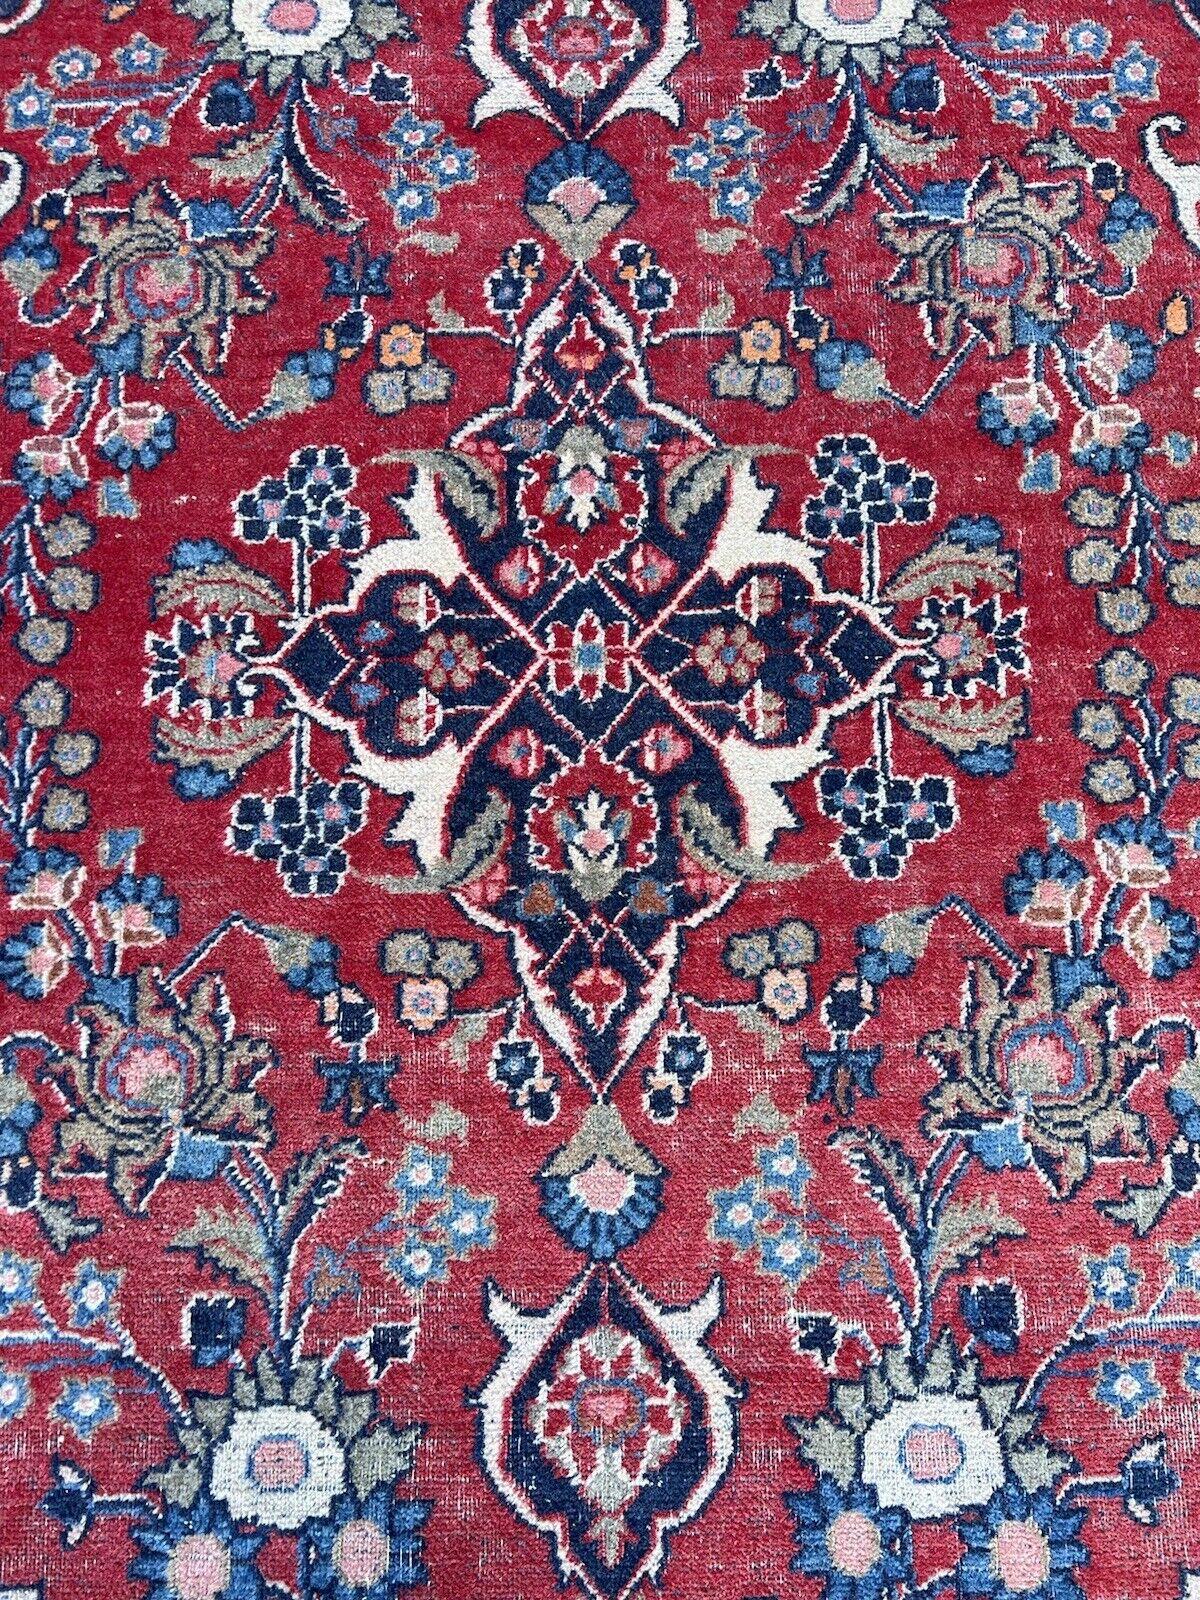 Handmade Antique Persian Style Kashan Rug 4.4' x 6.5', 1920s - 1S43 For Sale 5